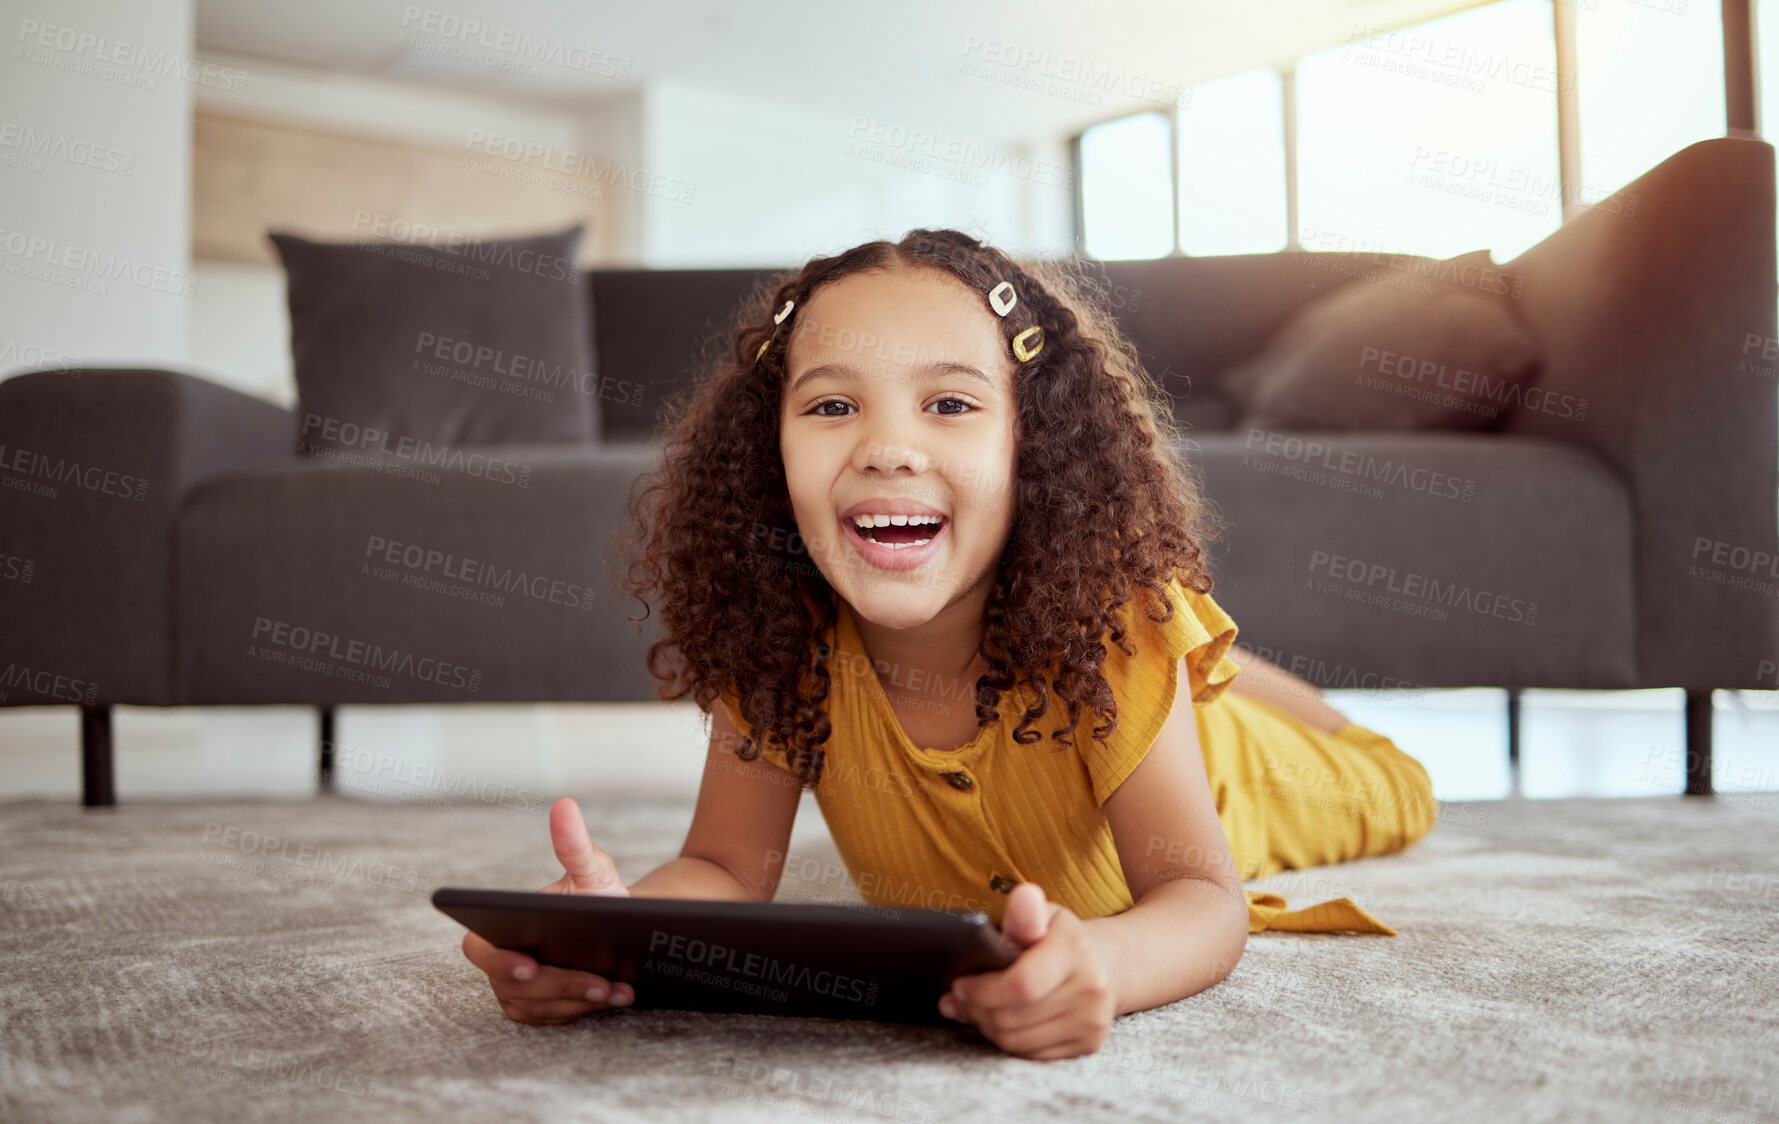 Buy stock photo Portrait of adorable little mixed race child using digital tablet in home living room. One small cute hispanic girl lying alone on lounge floor, playing game on technology. Happy kid with curly hair